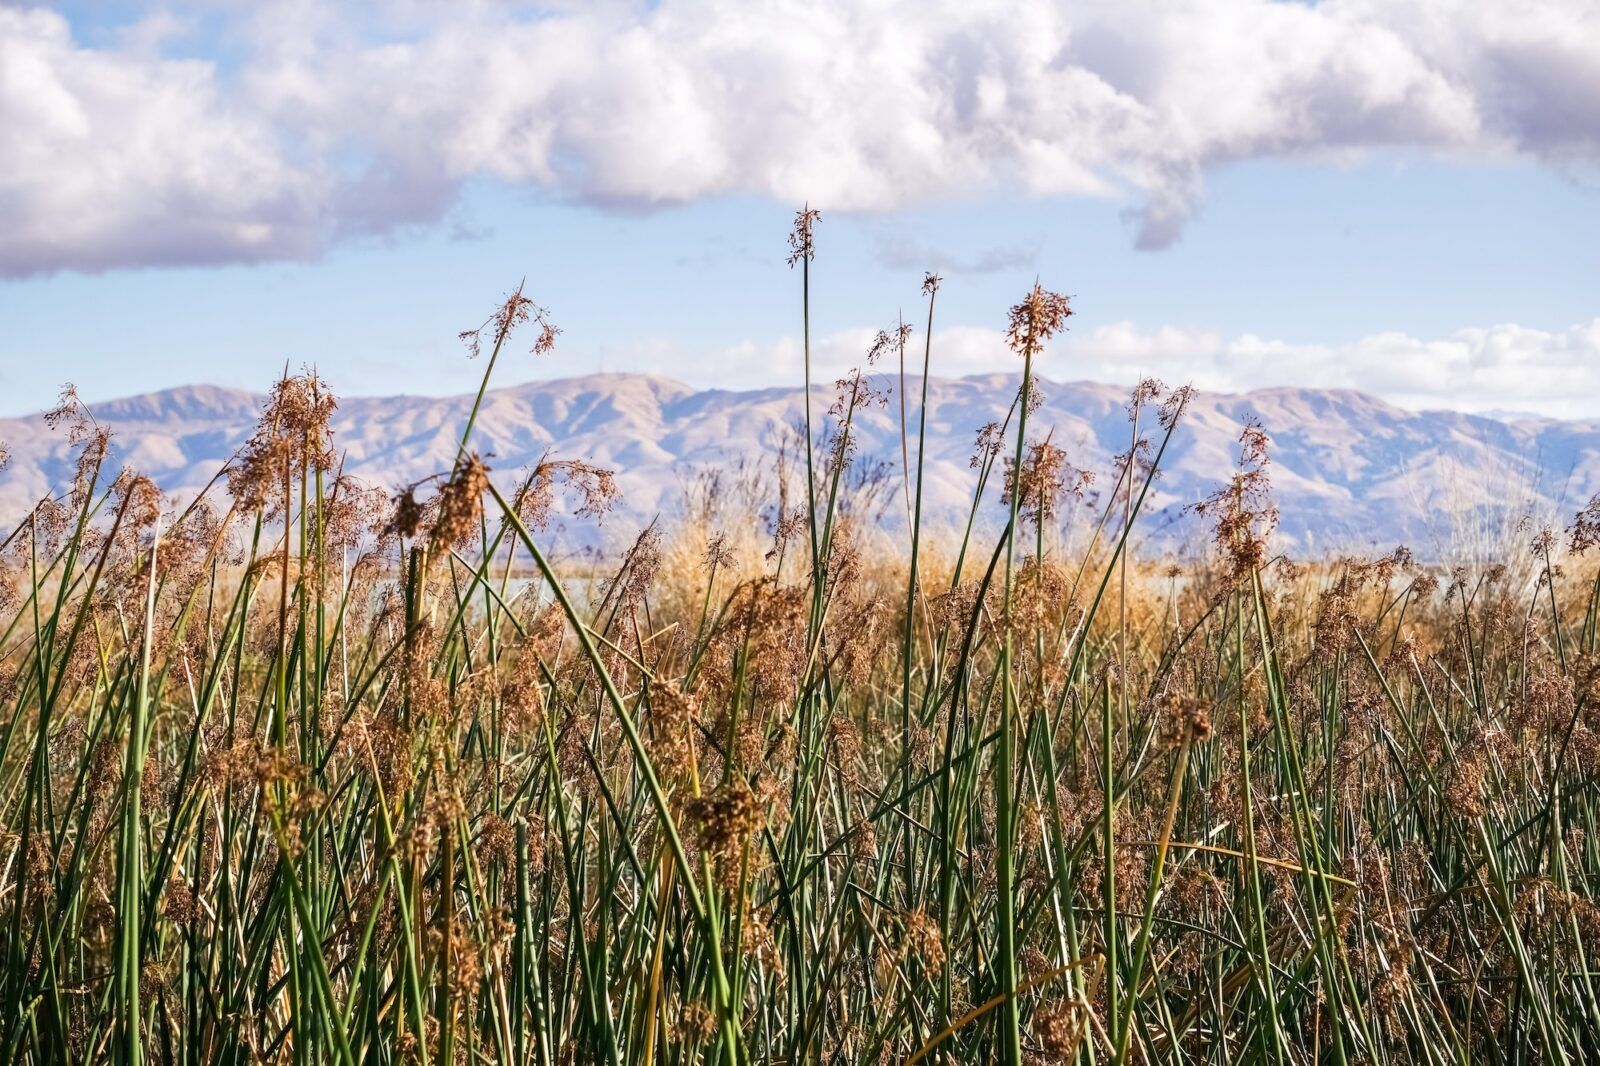 Tule reeds in the marshes of south San Francisco bay, Sunnyvale, California